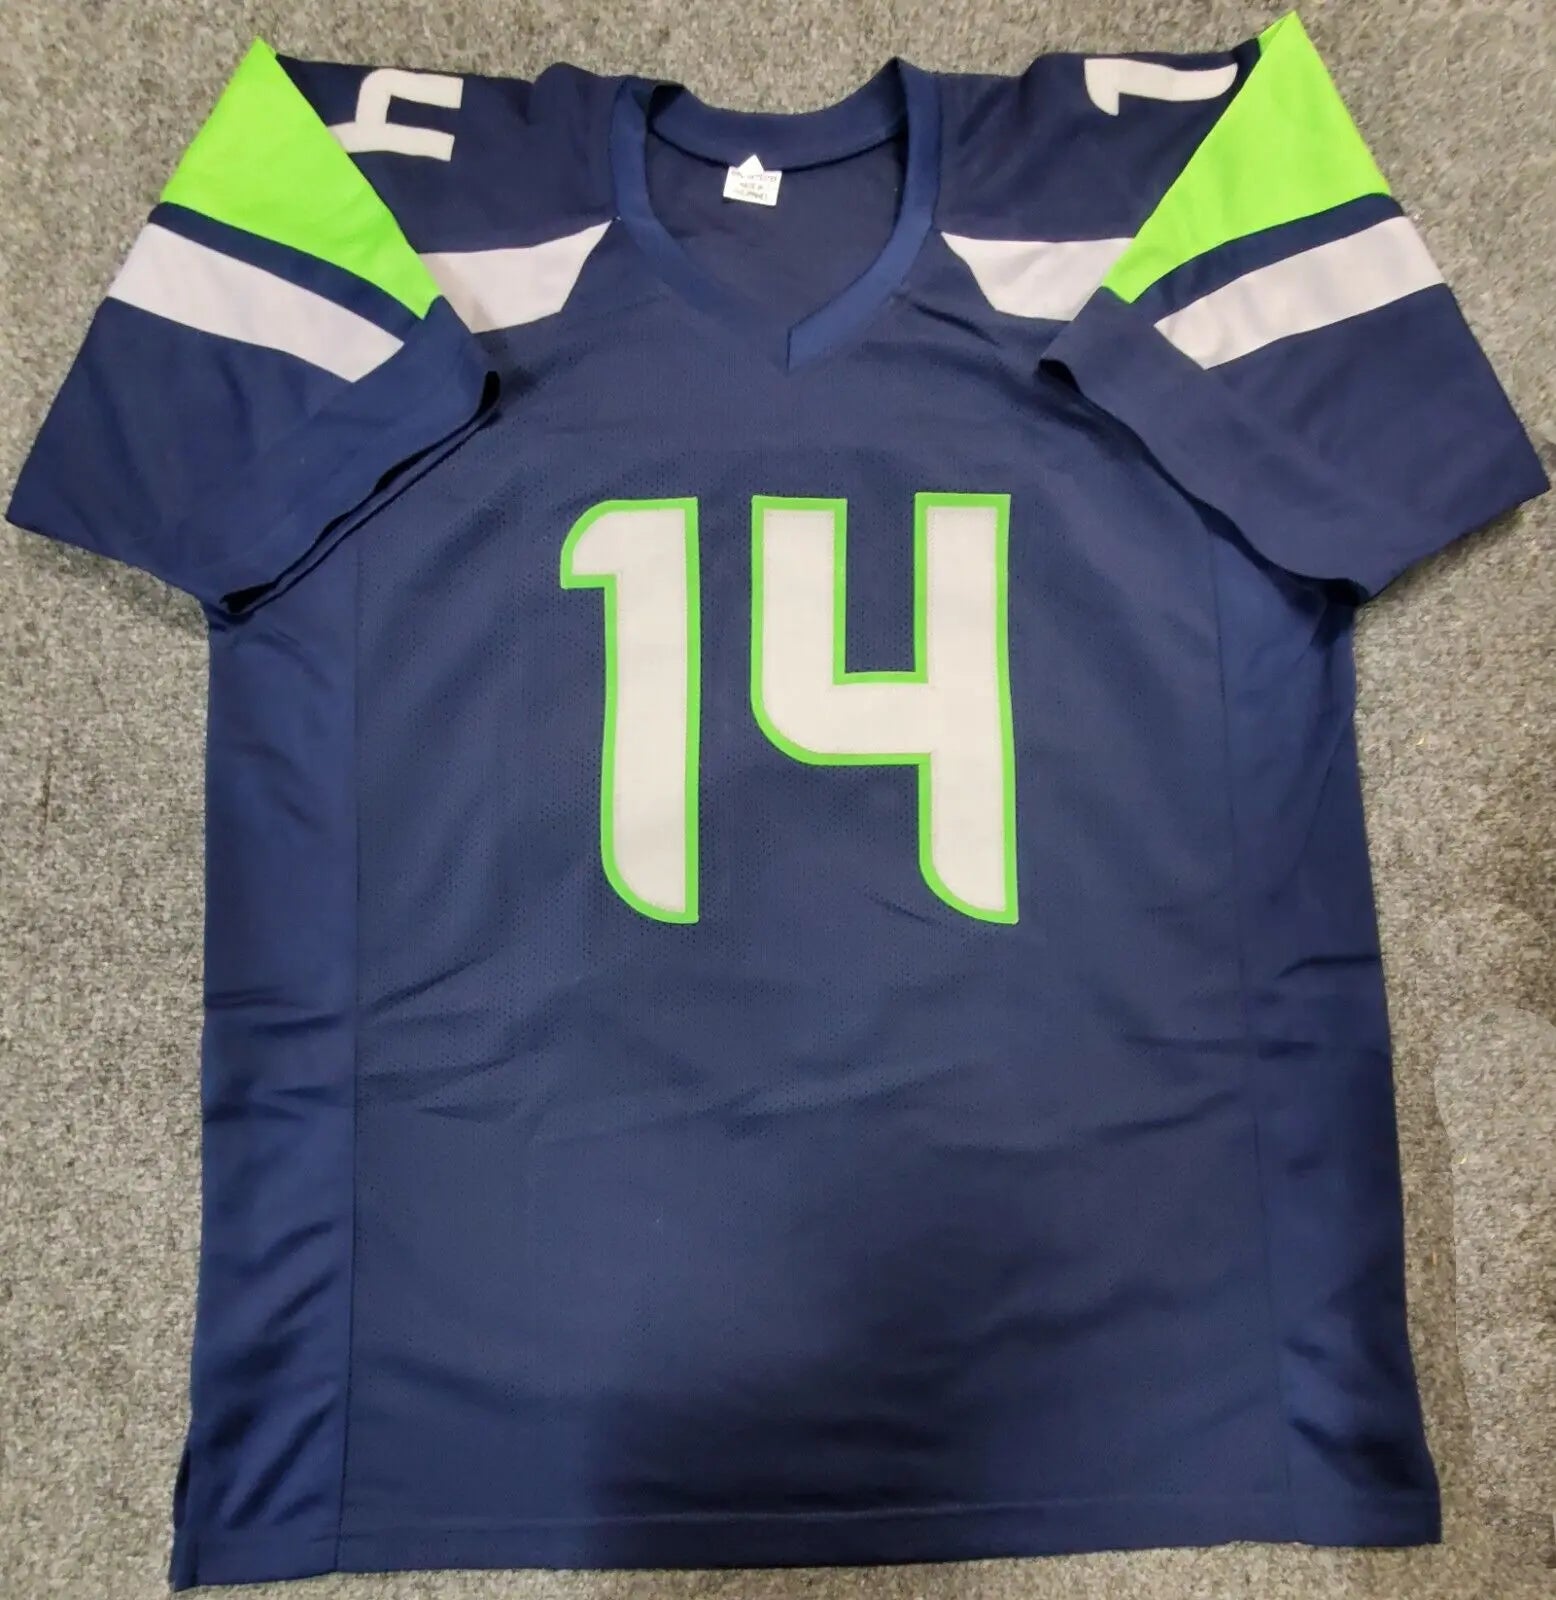 MVP Authentics Seattle Seahawks Dk Metcalf Autographed Signed Seattle Jsa Coa 179.10 sports jersey framing , jersey framing